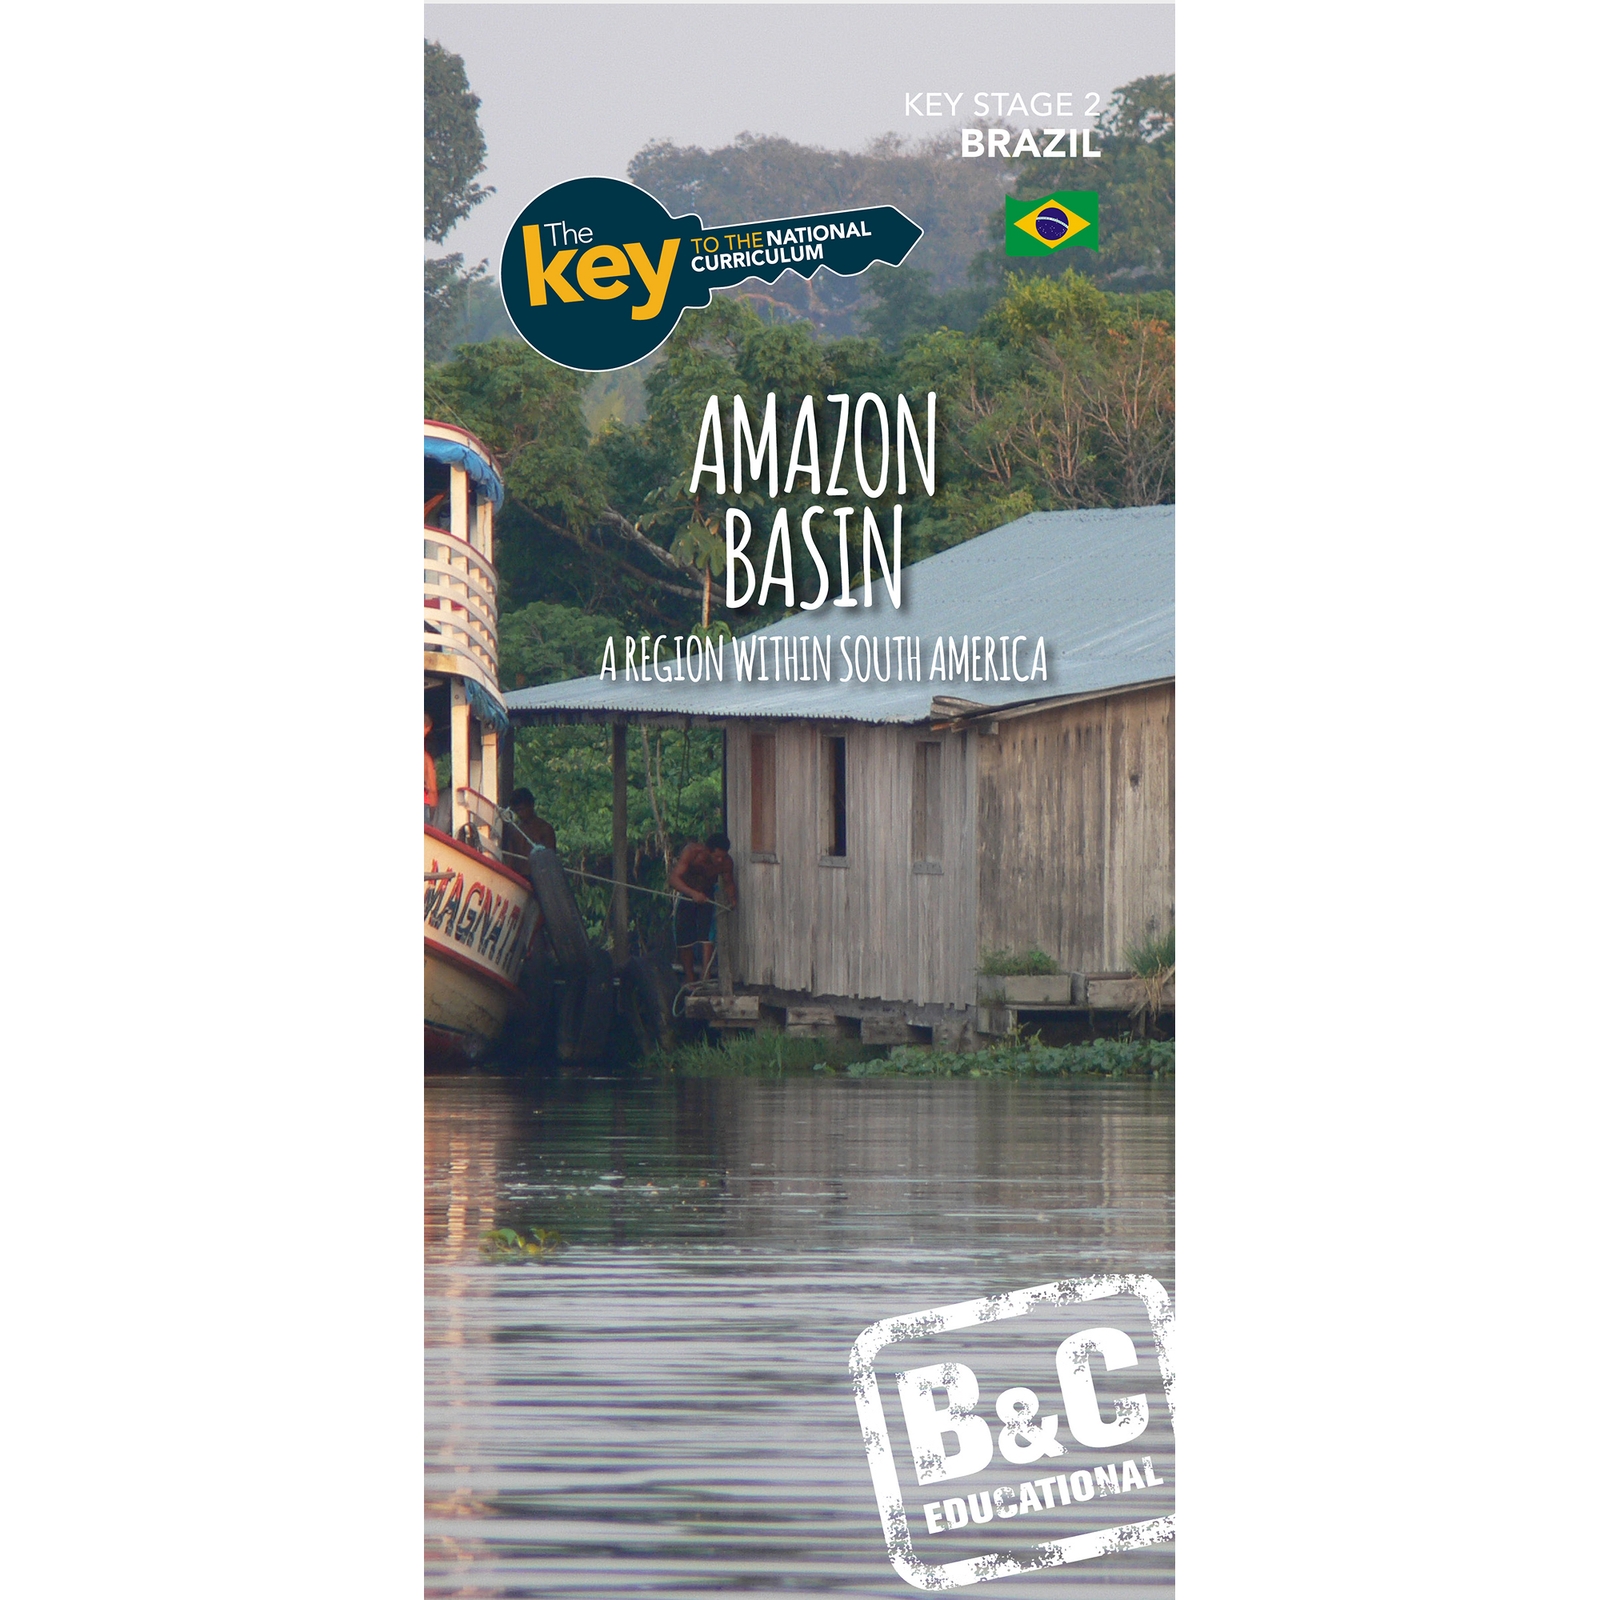 The Key To the National Curriculum - Amazon Basin